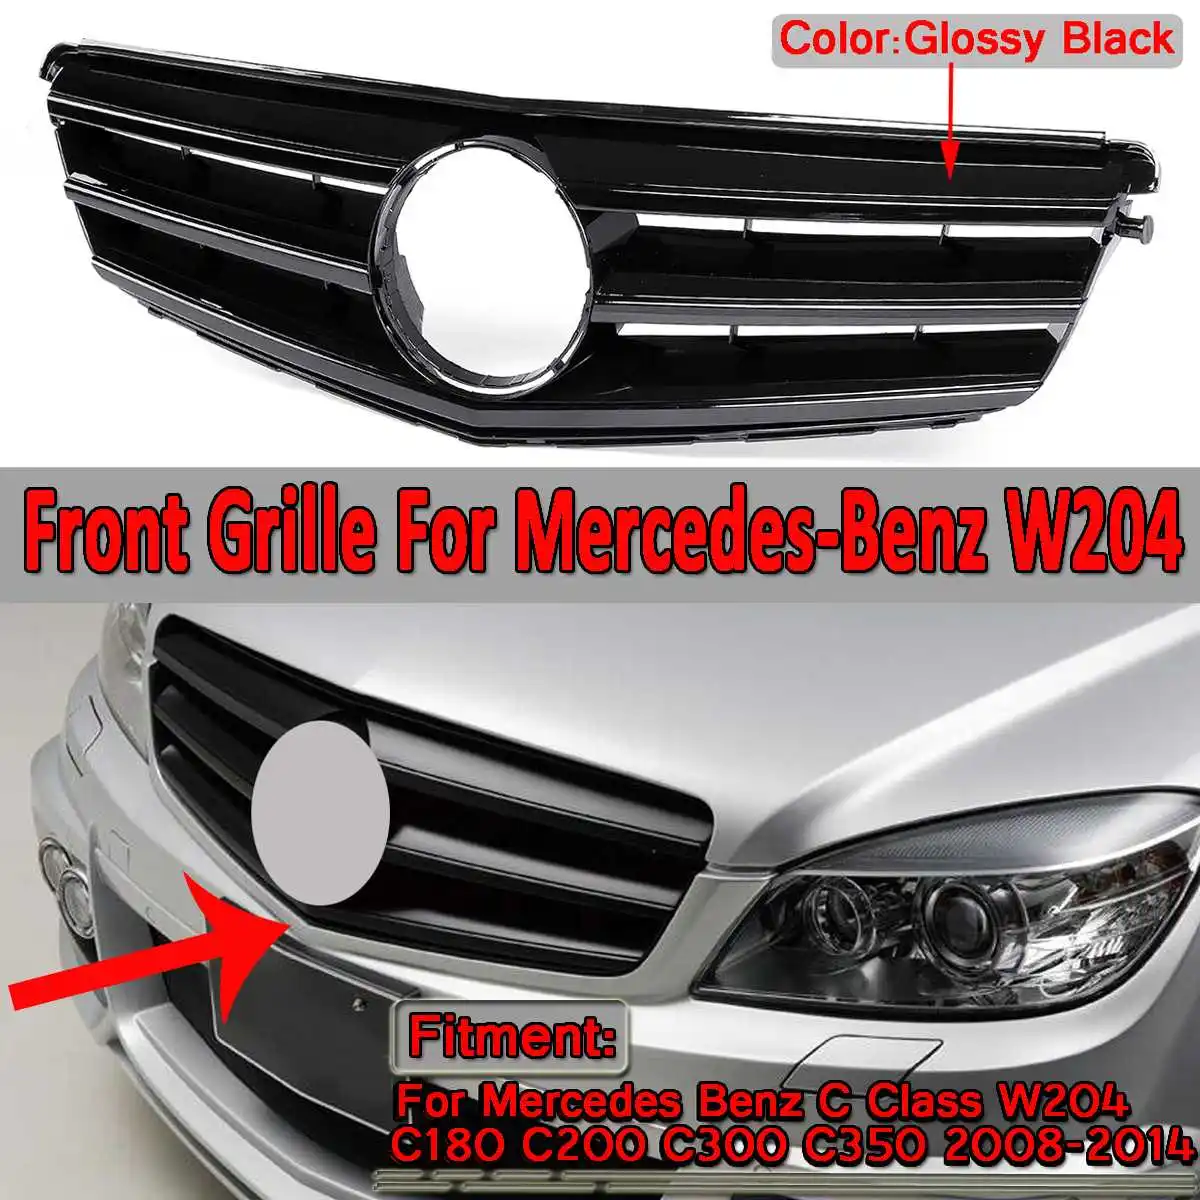 

Car GT R Style Front Upper Racing Grille Grill For Mercedes For Benz C Class W204 C180 C200 C300 C350 2008-2014